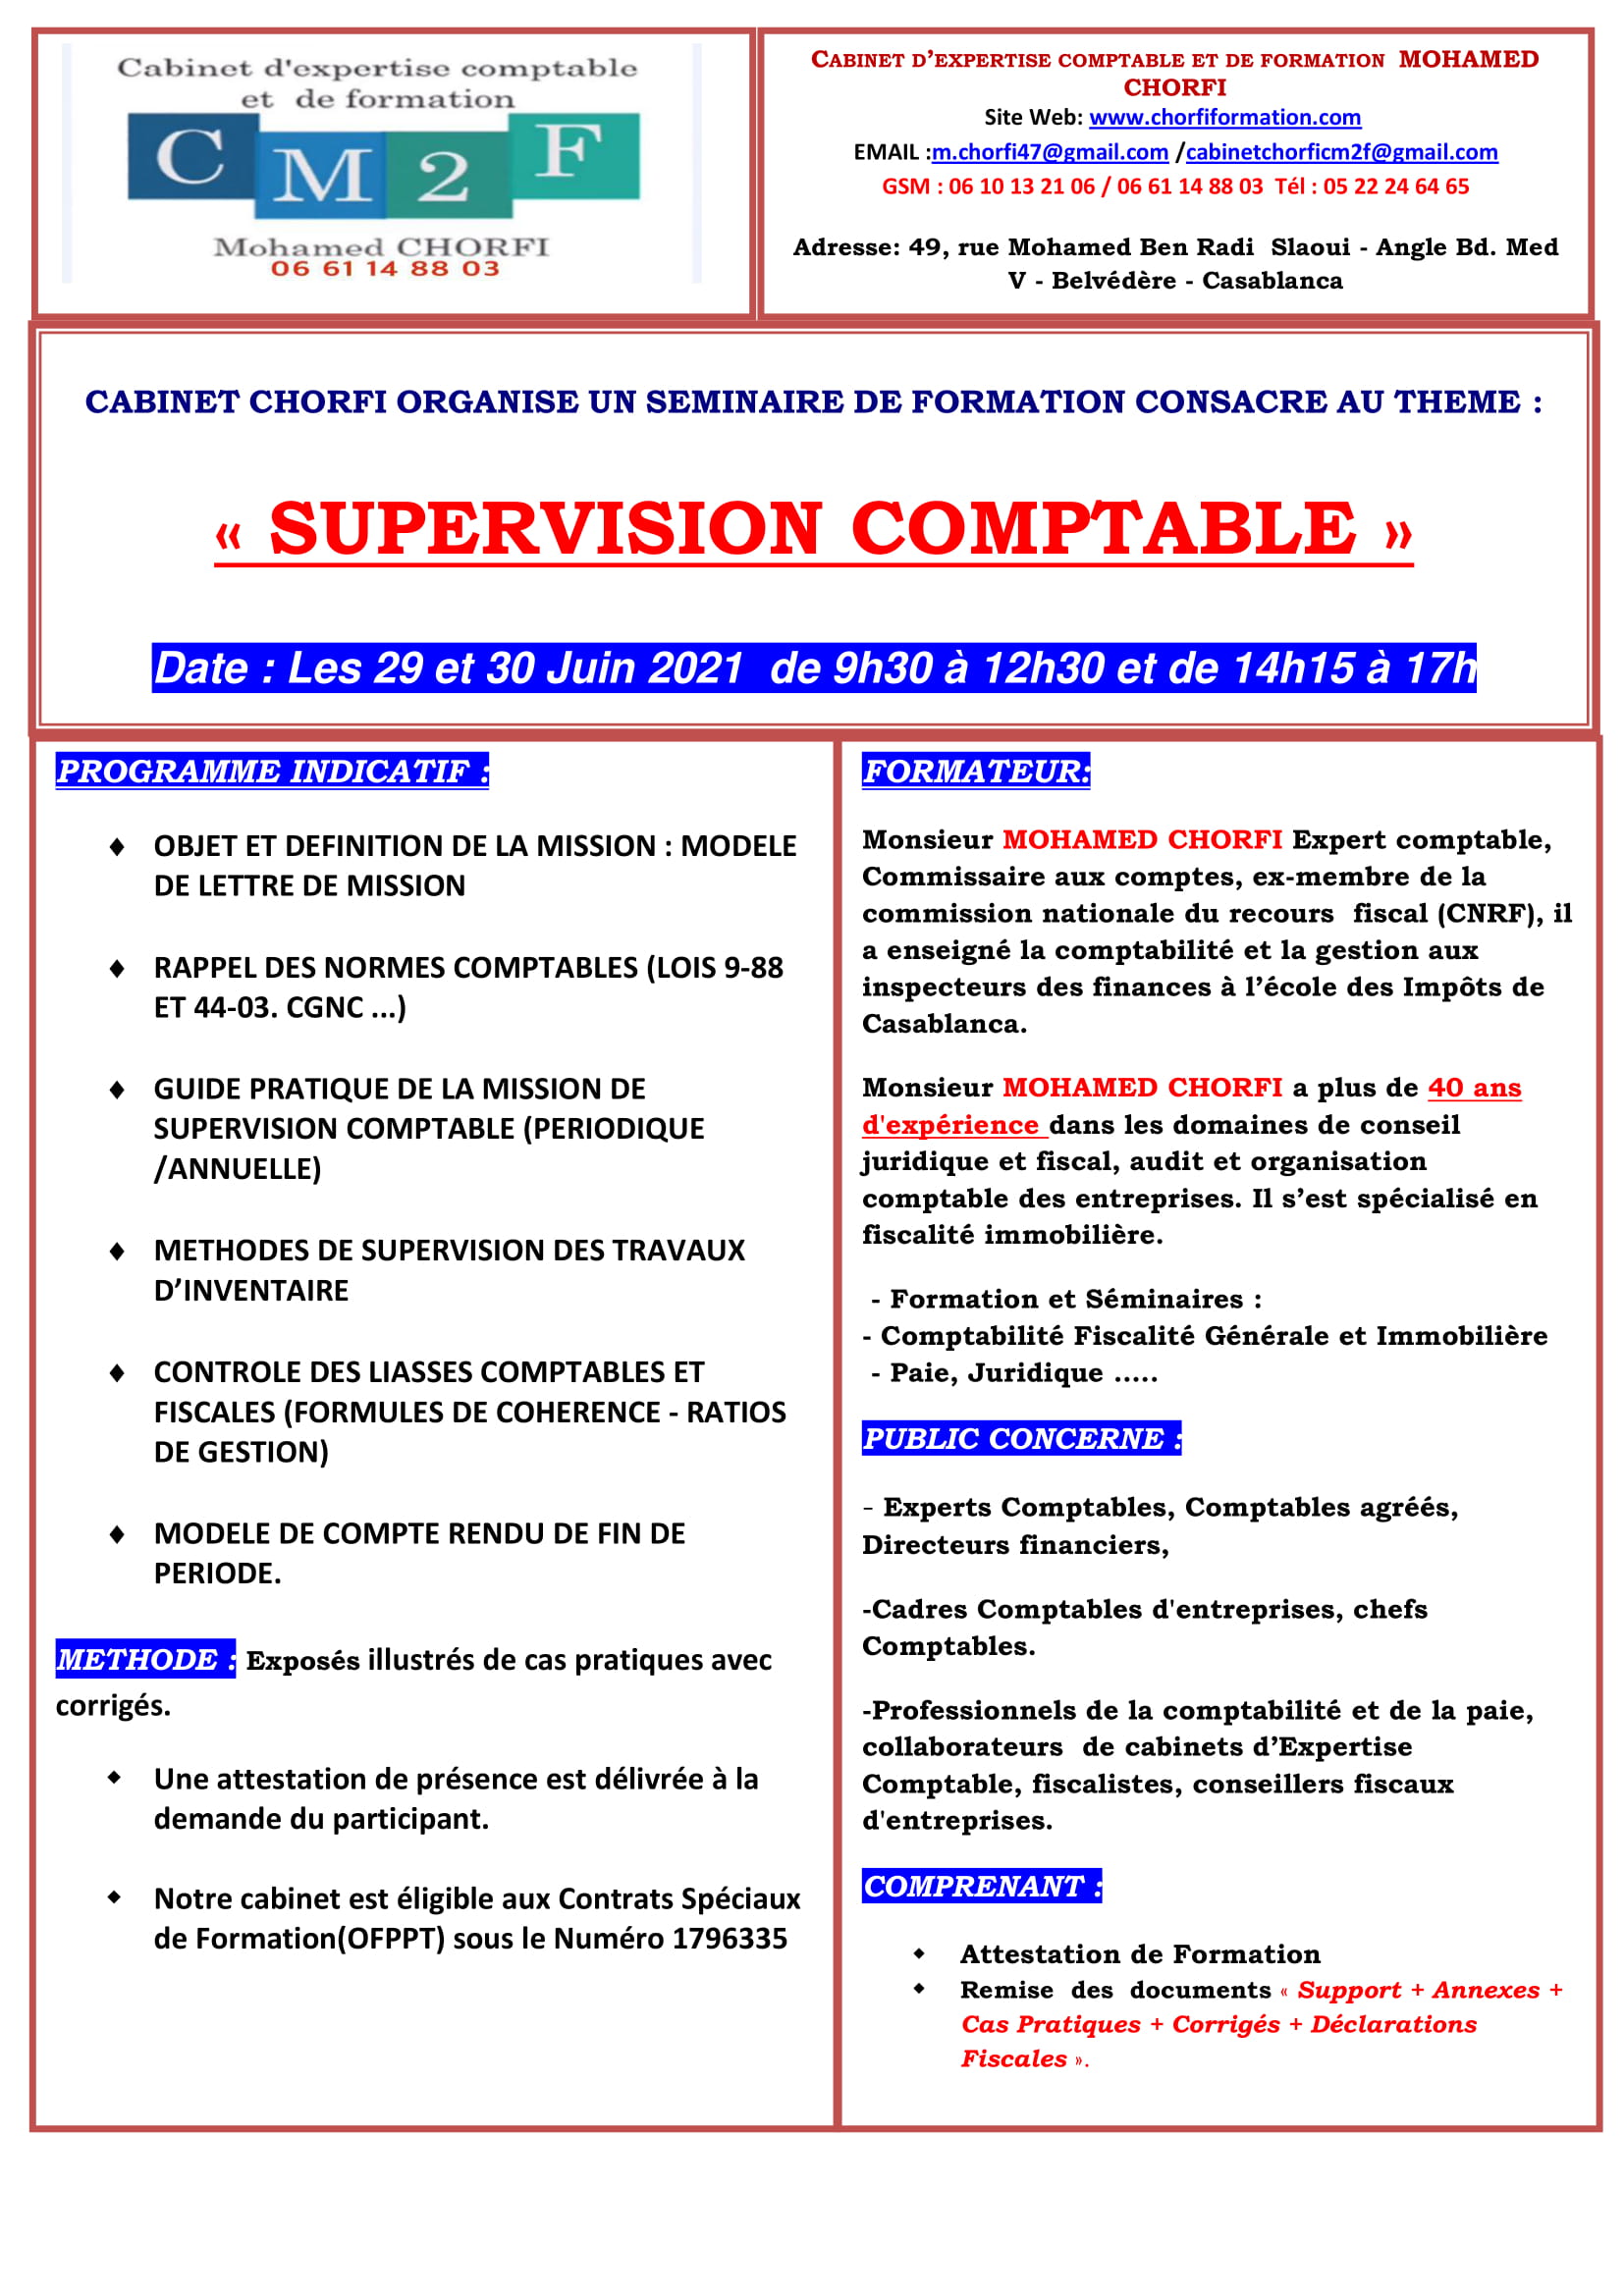 01-SEMINAIRE Supervision comptable-1